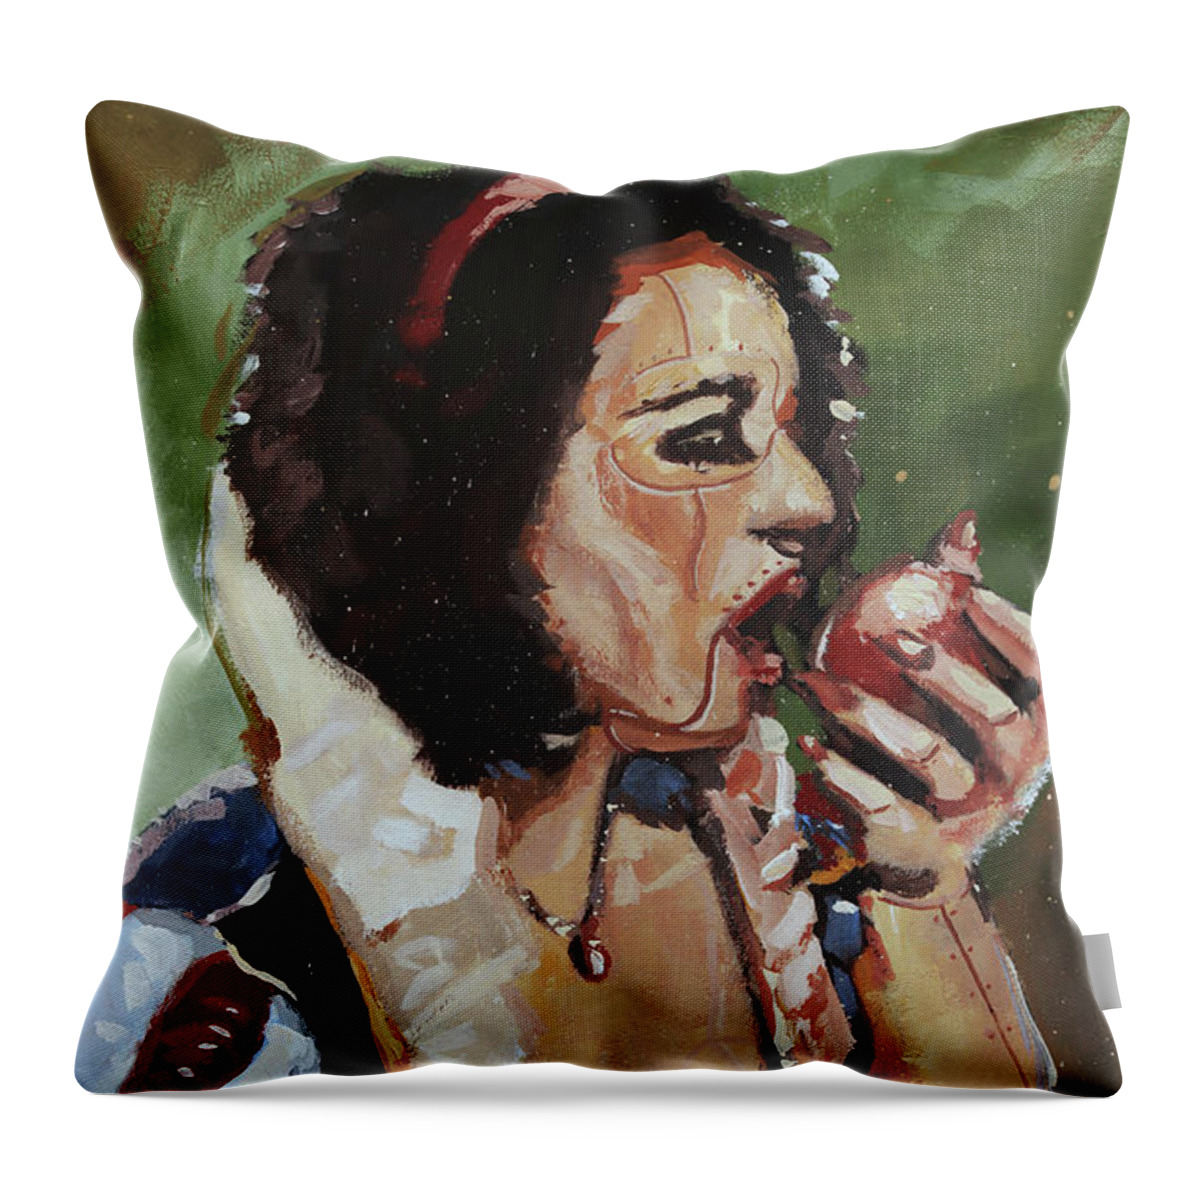 Snow White Throw Pillow featuring the painting Mechanical Snow White by Sv Bell